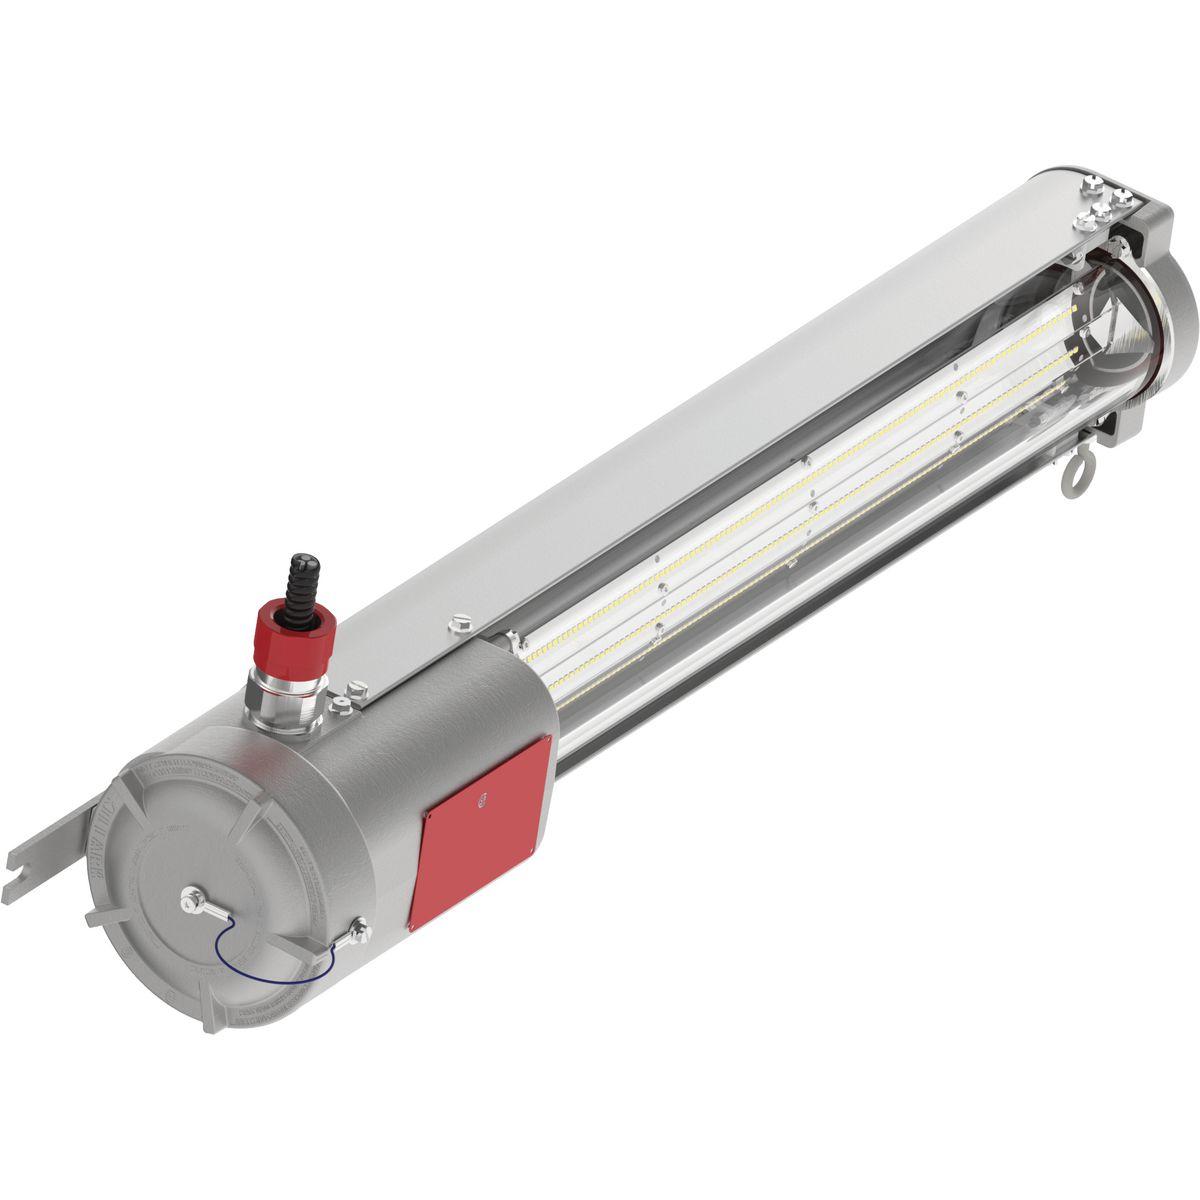 Hubbell L1L730D-3590 L1L Series 7,000 Lumen Output 3500K CCT & 90 CRI, 120-277 Universal Voltage With Diffuse Glass Optic  ; Tool-less access to wiring chamber ; Slot-back design allows for a 5/16 or M8 bolt to be mounted anywhere along the back of the luminaire ; Standard su